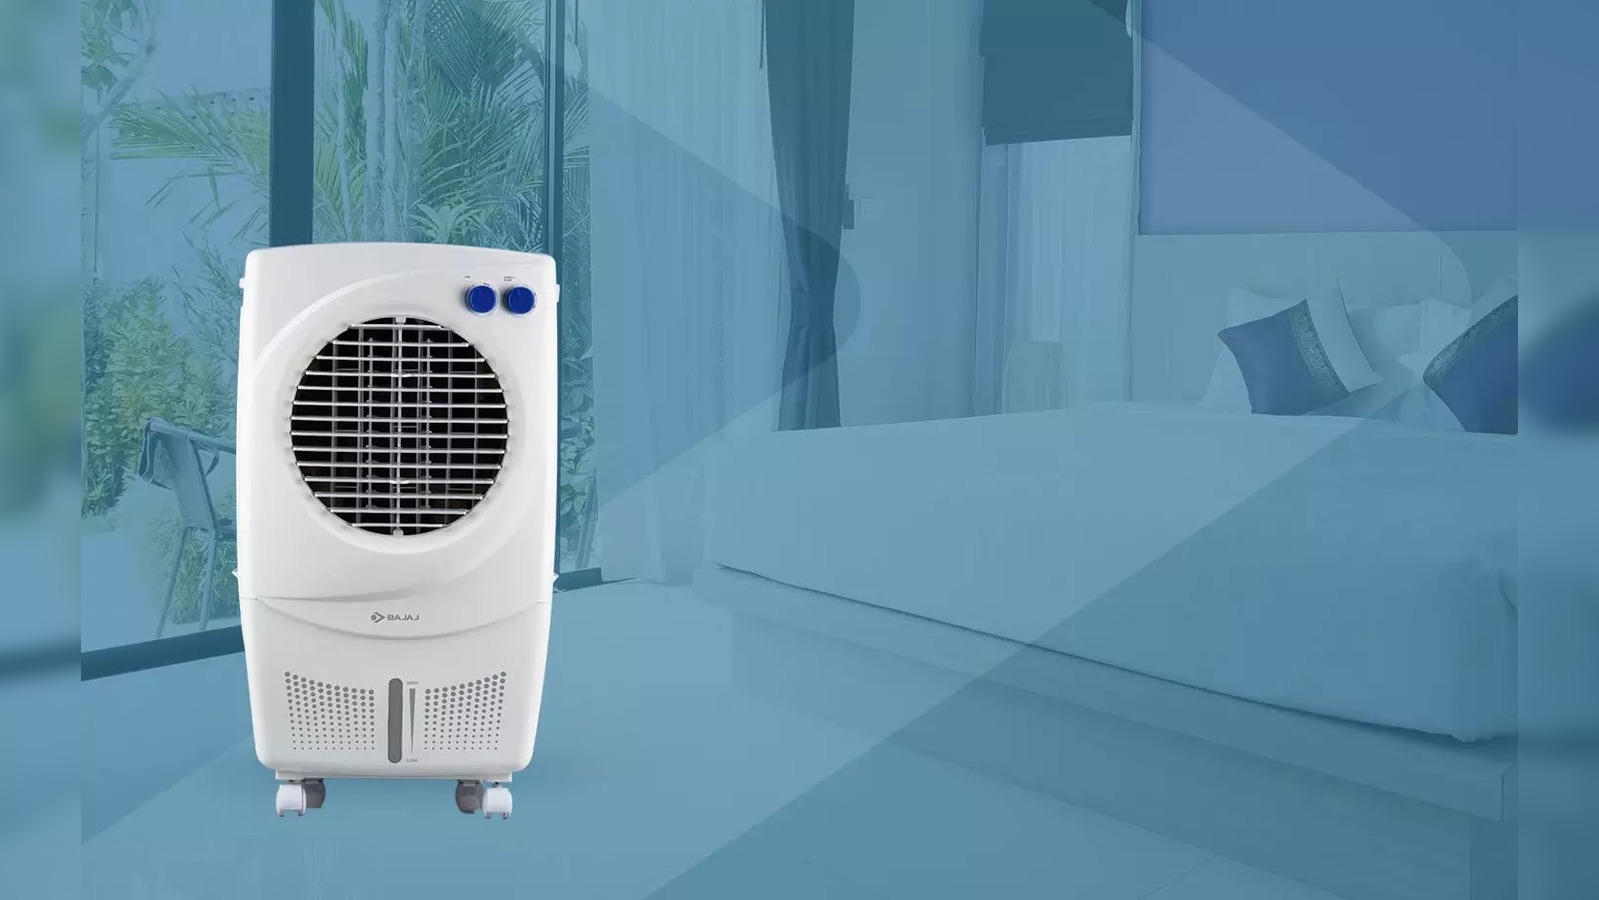 Air Coolers Buying Guide, How to Choose the Best Air Cooler